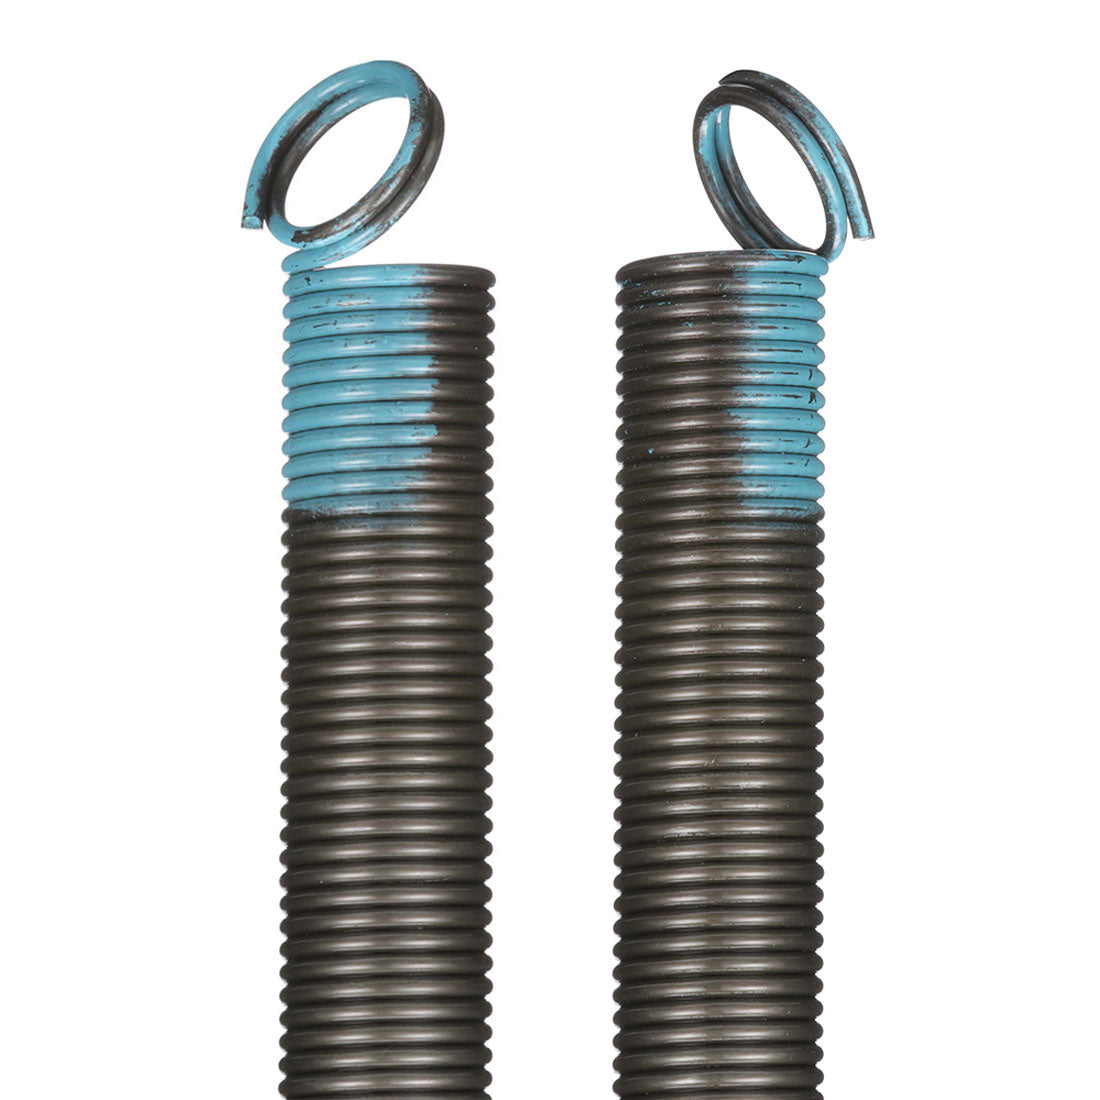 DURA-LIFT 90 lb Heavy-Duty Doubled-Looped Garage Door Extension Spring (2-Pack)